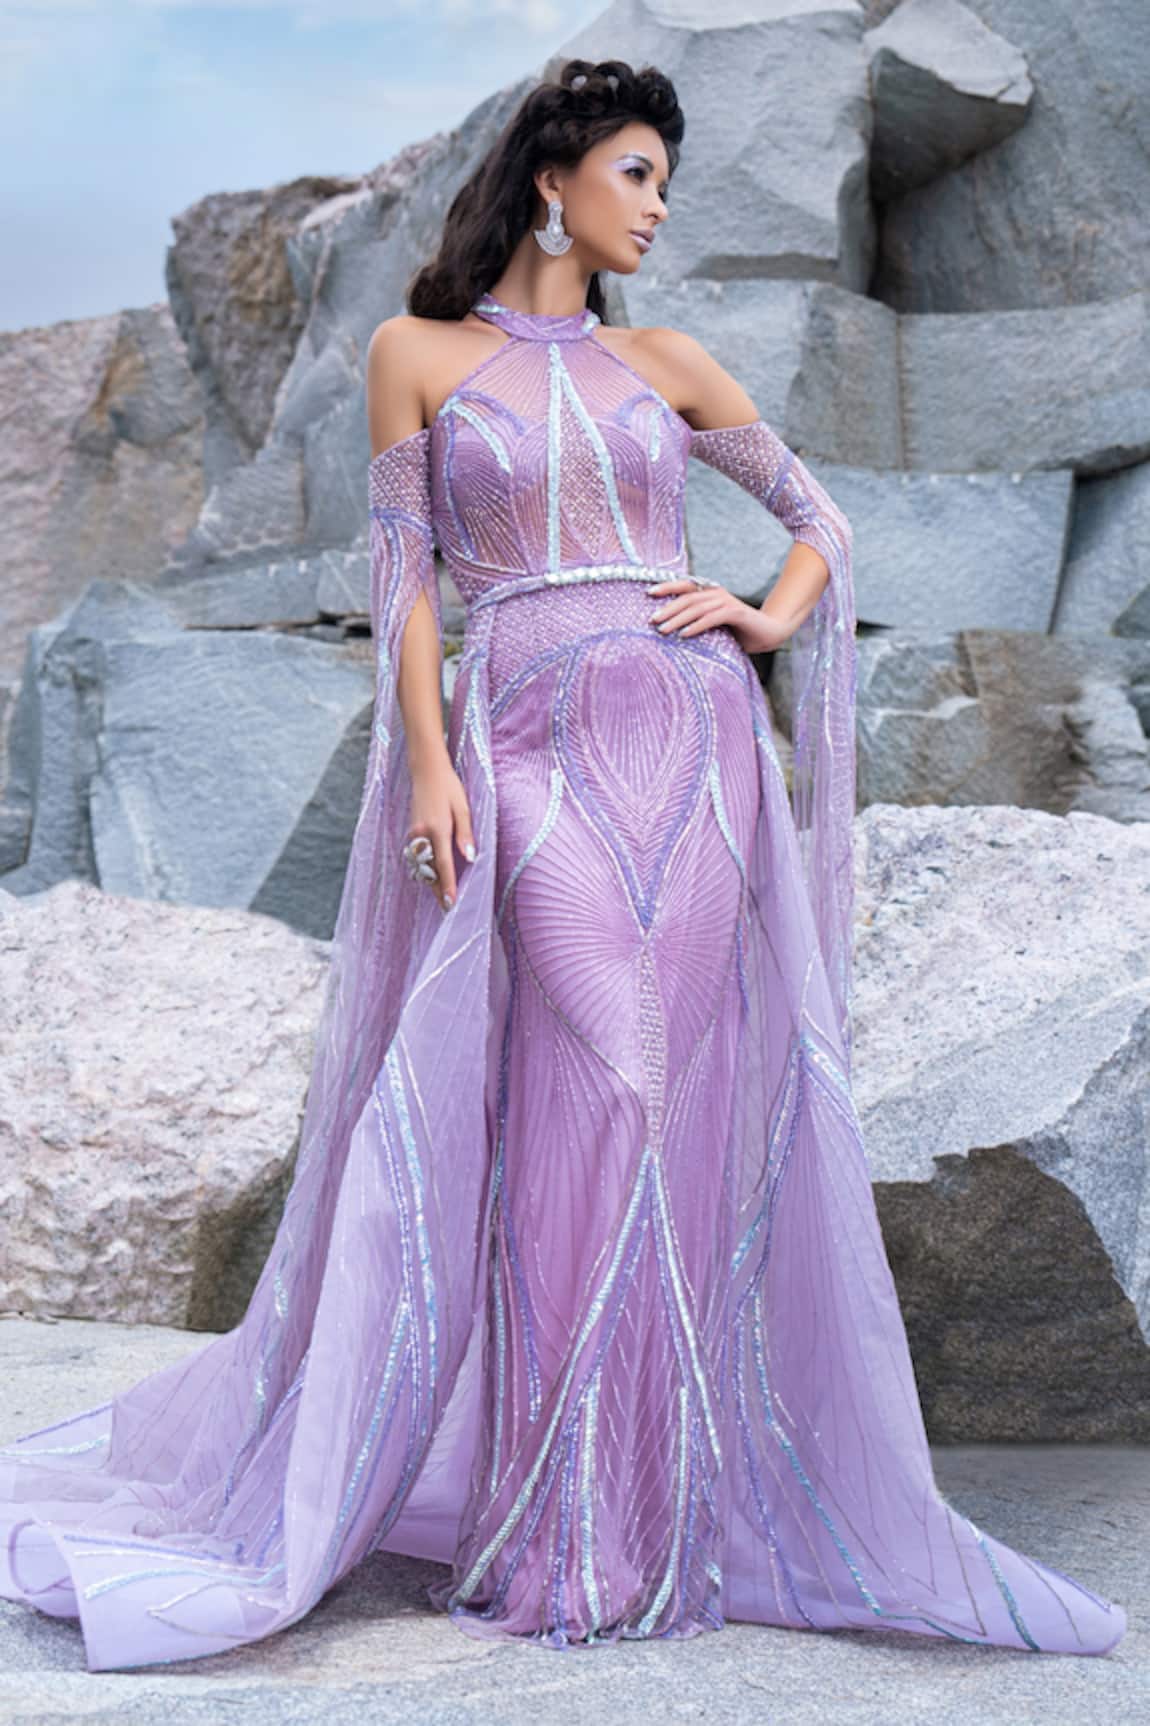 Amit GT Aurora Chrystalis Gown With Train